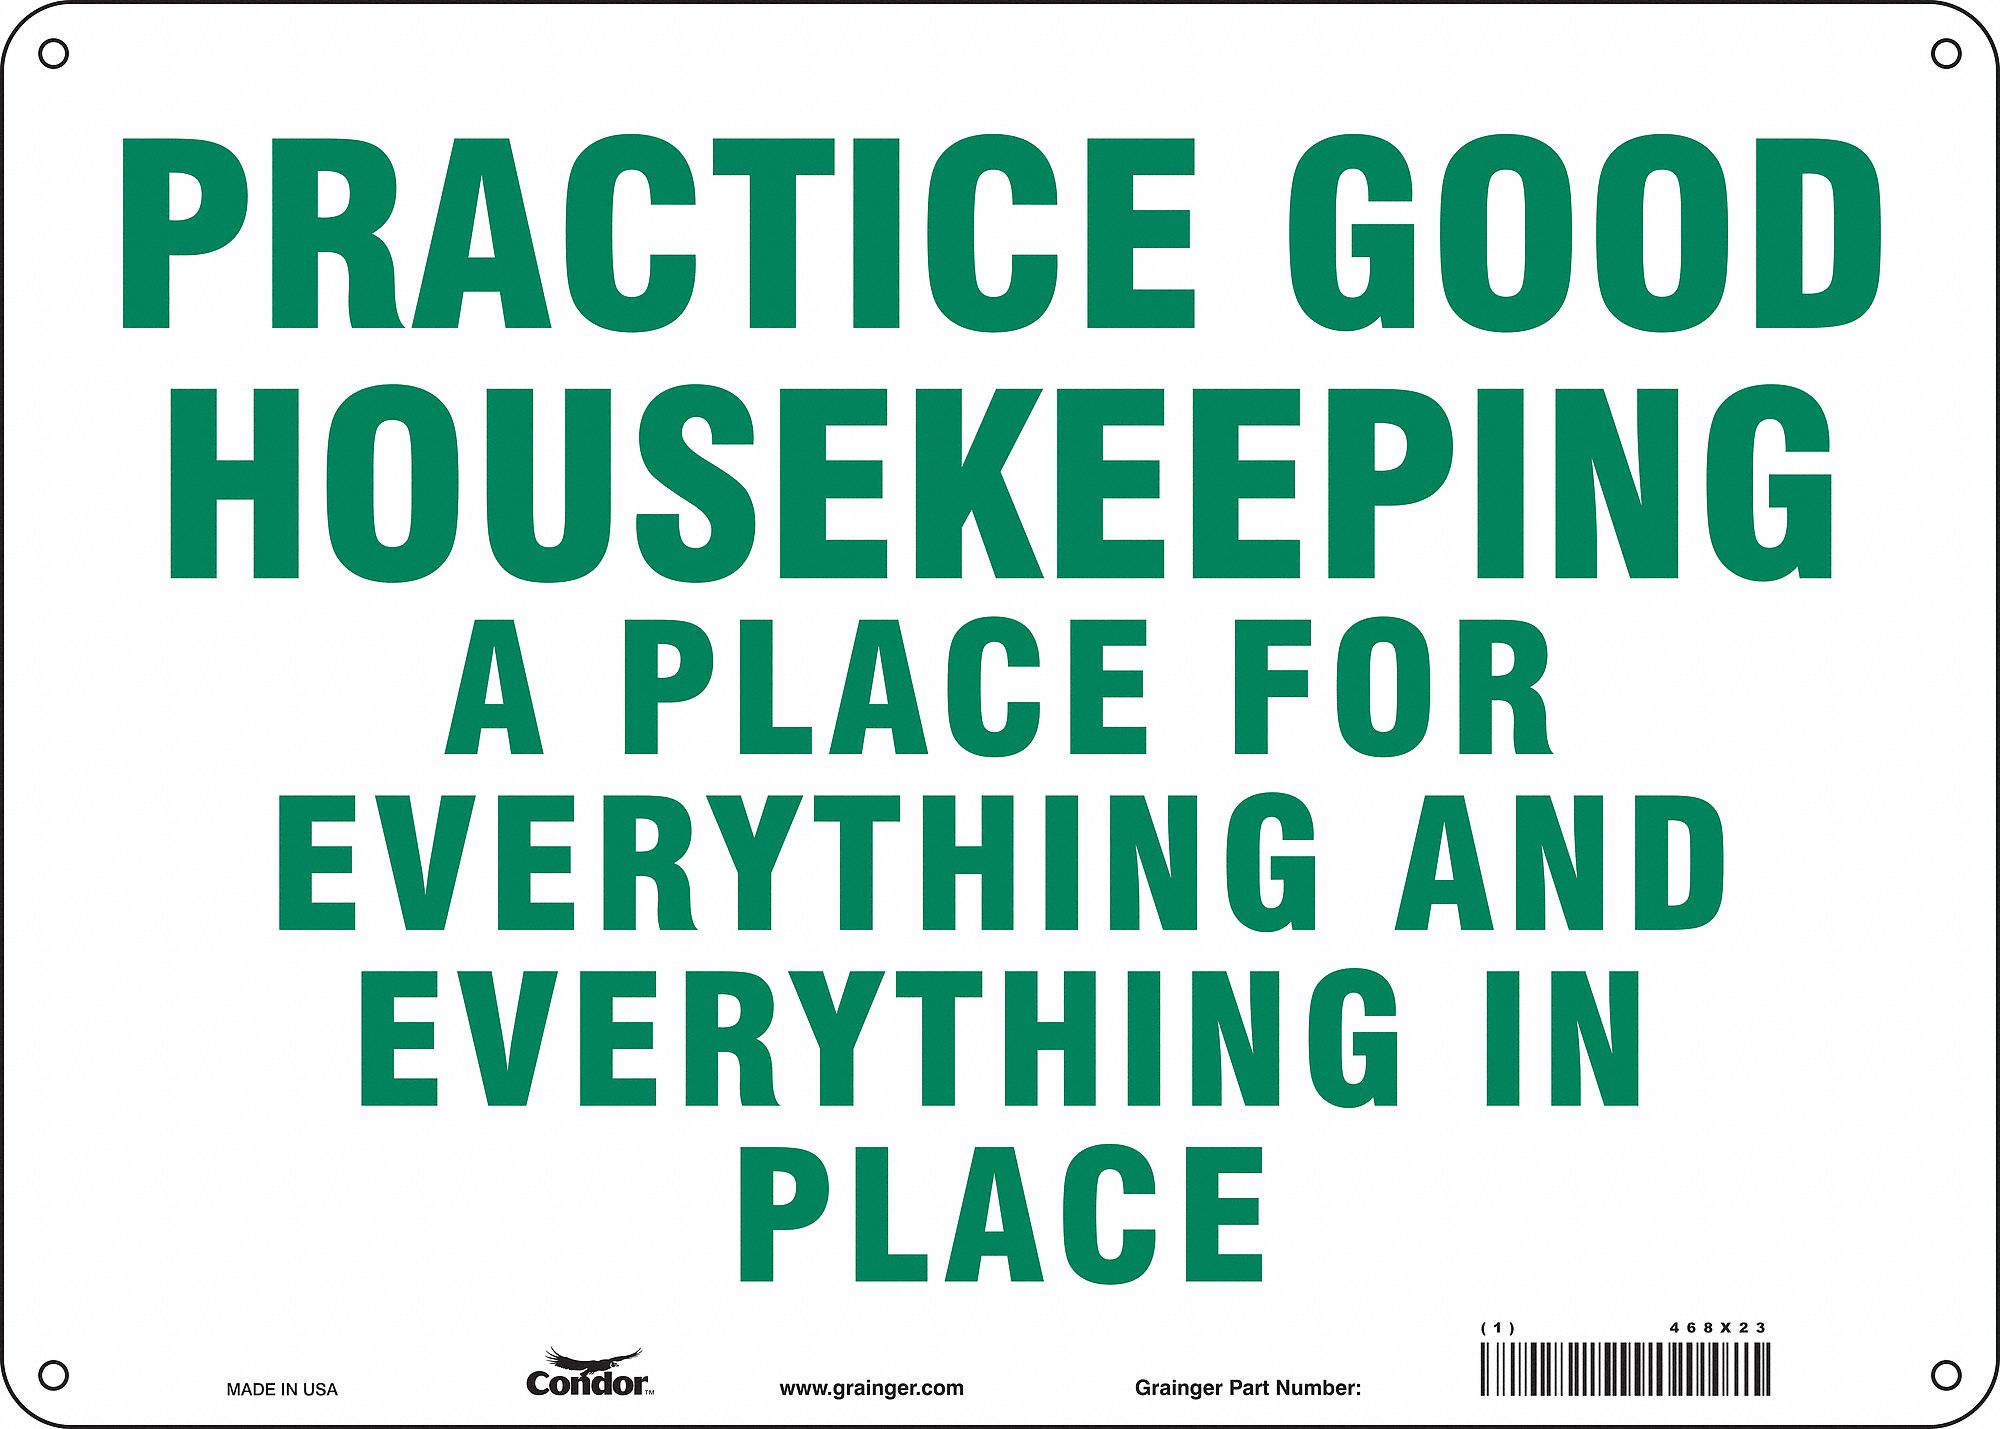 Condor Safety Sign Practice Good Housekeeping A Place For Everything And Everything In Place 468x23 468x23 Grainger